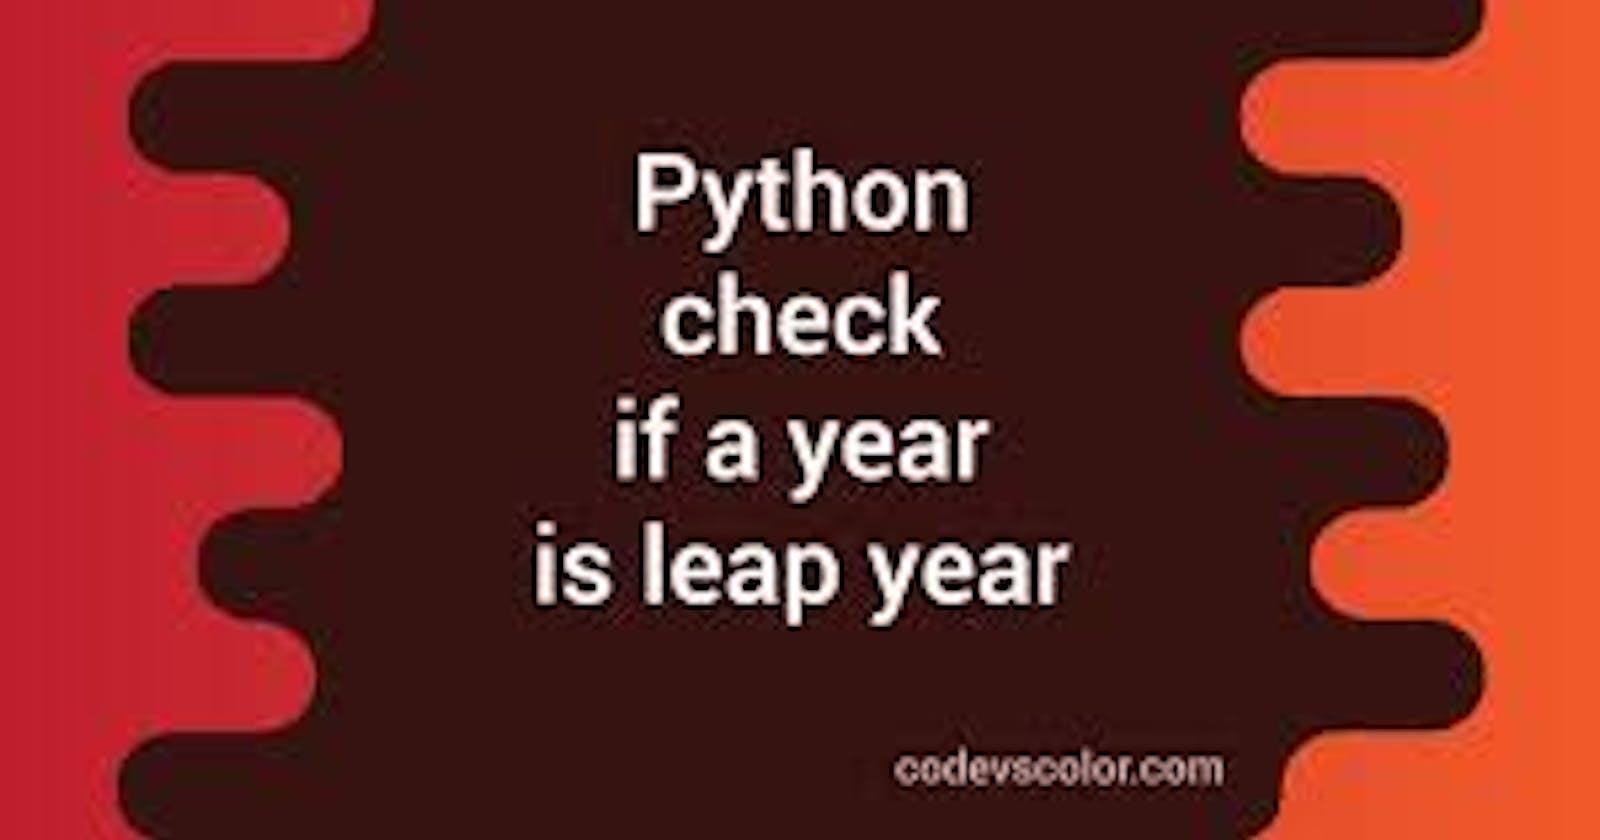 How to determine a leap year using control flow in python